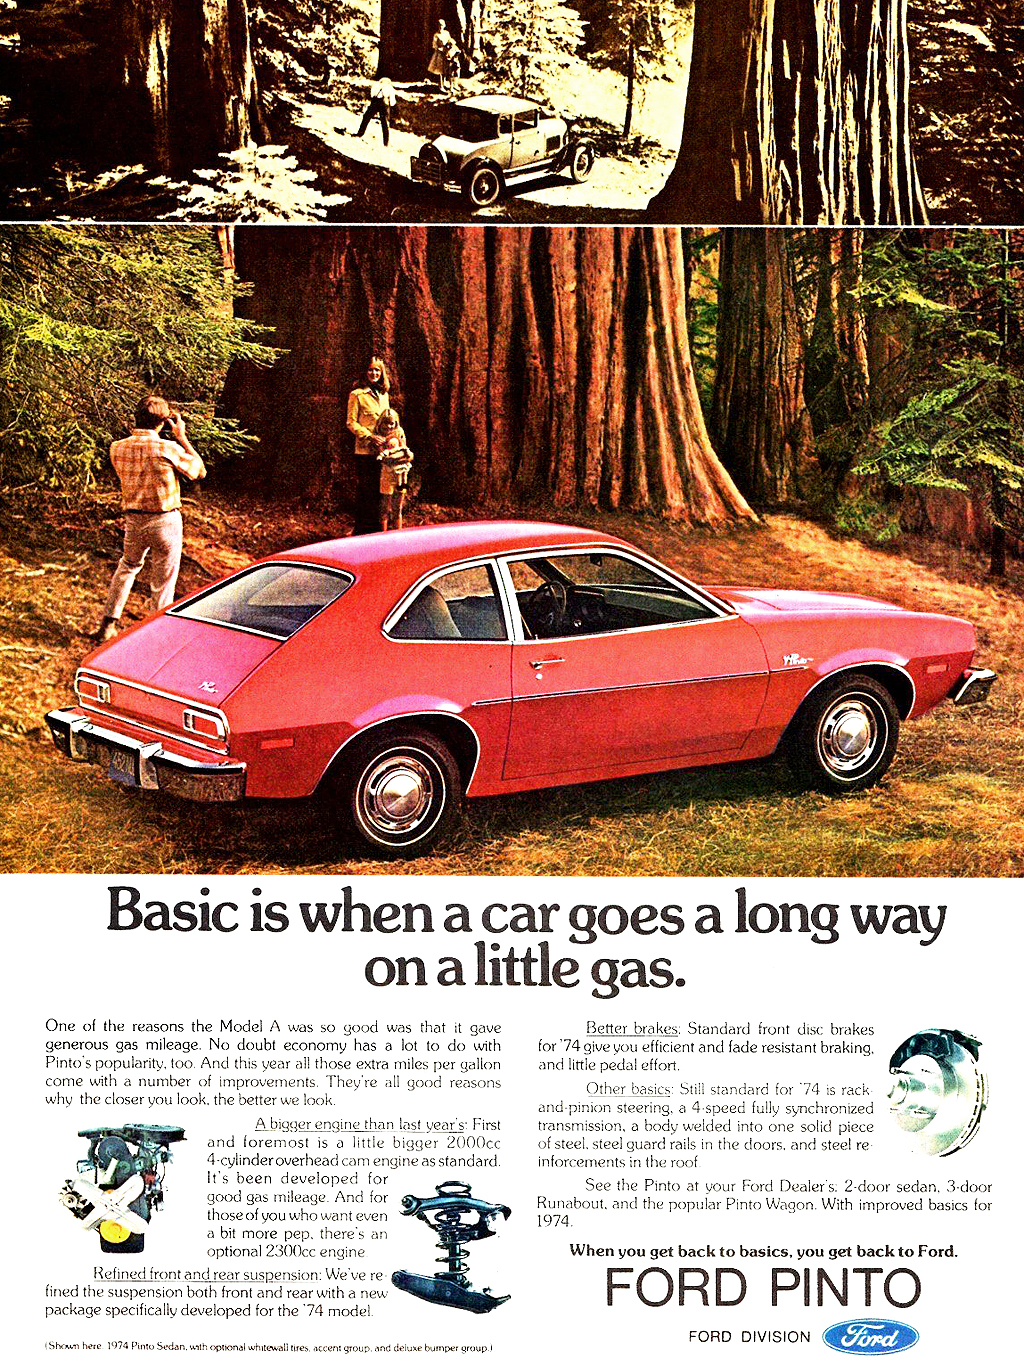 Ford Pinto Sedan Ad (1973–1974) - Basic is when a car goes a long way on a little gas.